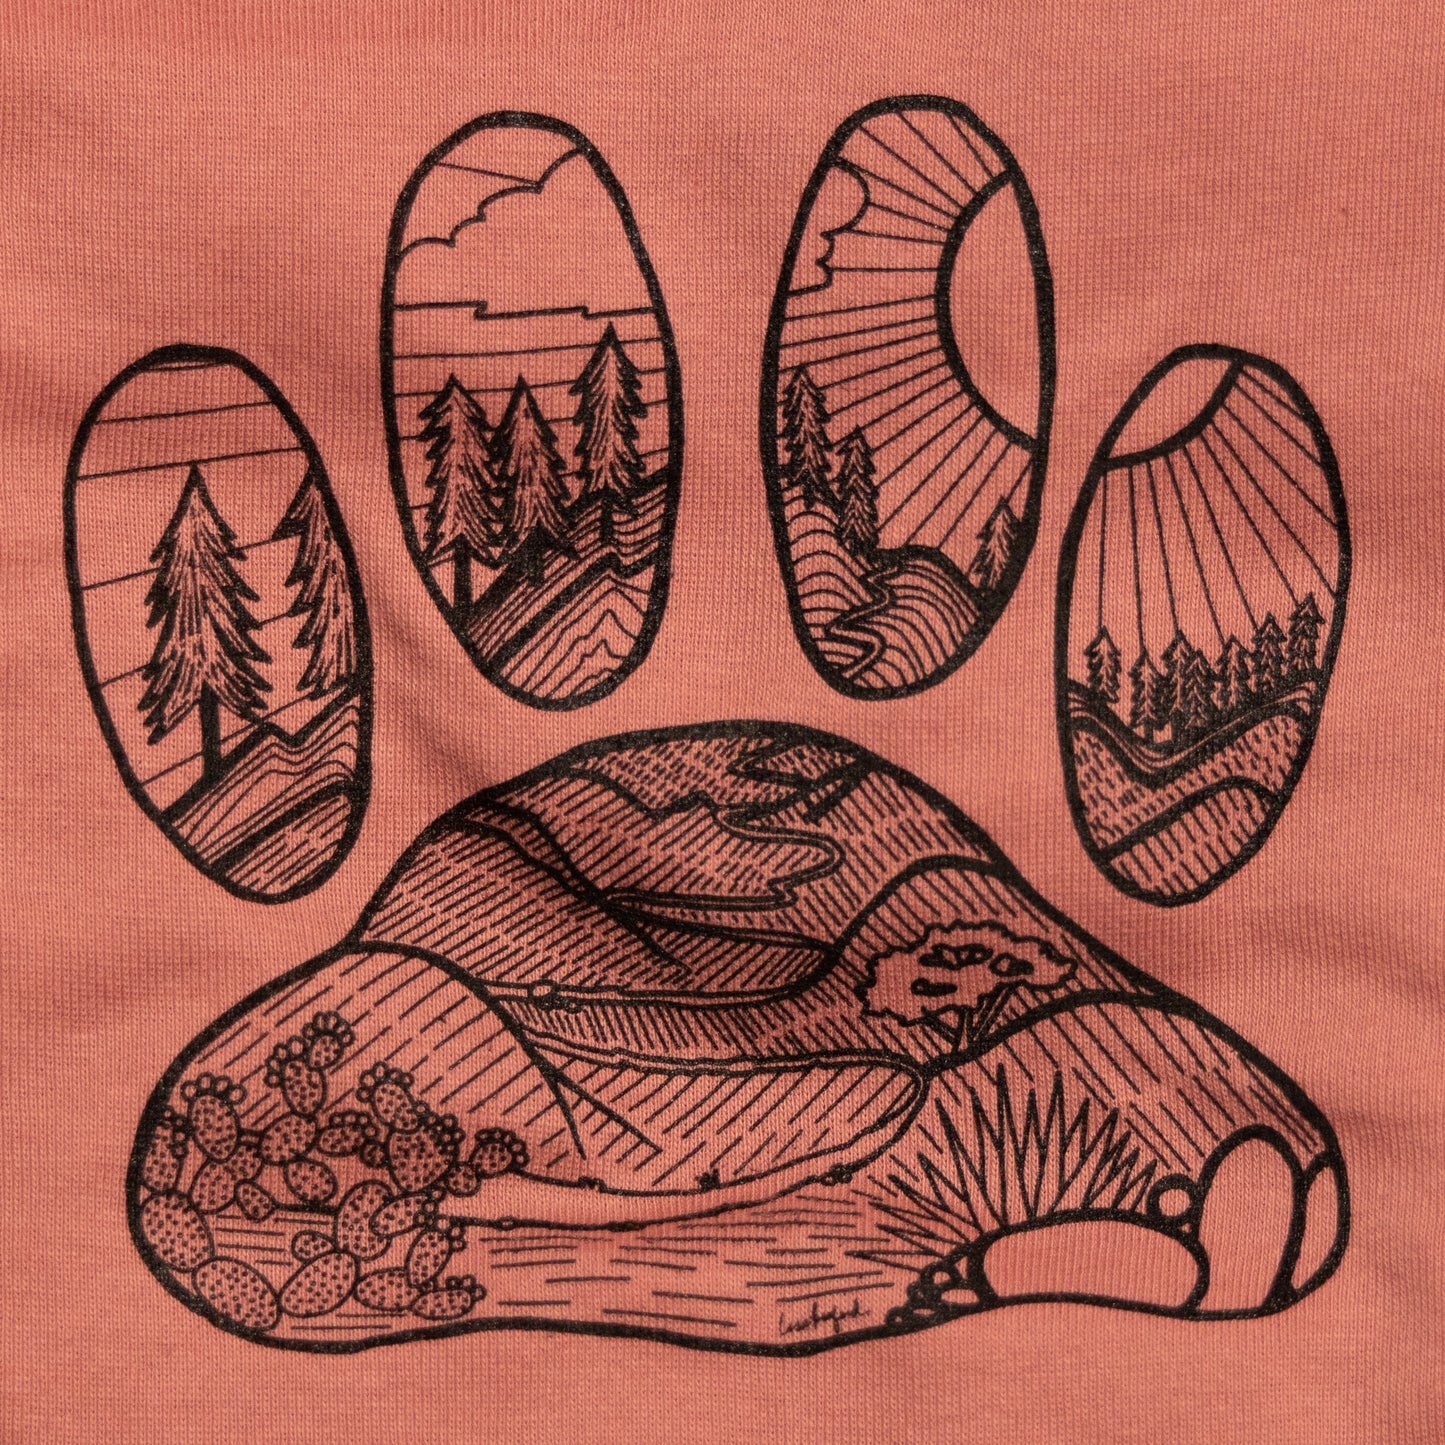 Close up of the illustrated design on the back that features a desert floor leading up to mountains with pine trees. The design is inside the shape of a dog paw print. The illustration is in black and the shirt color is mauve.